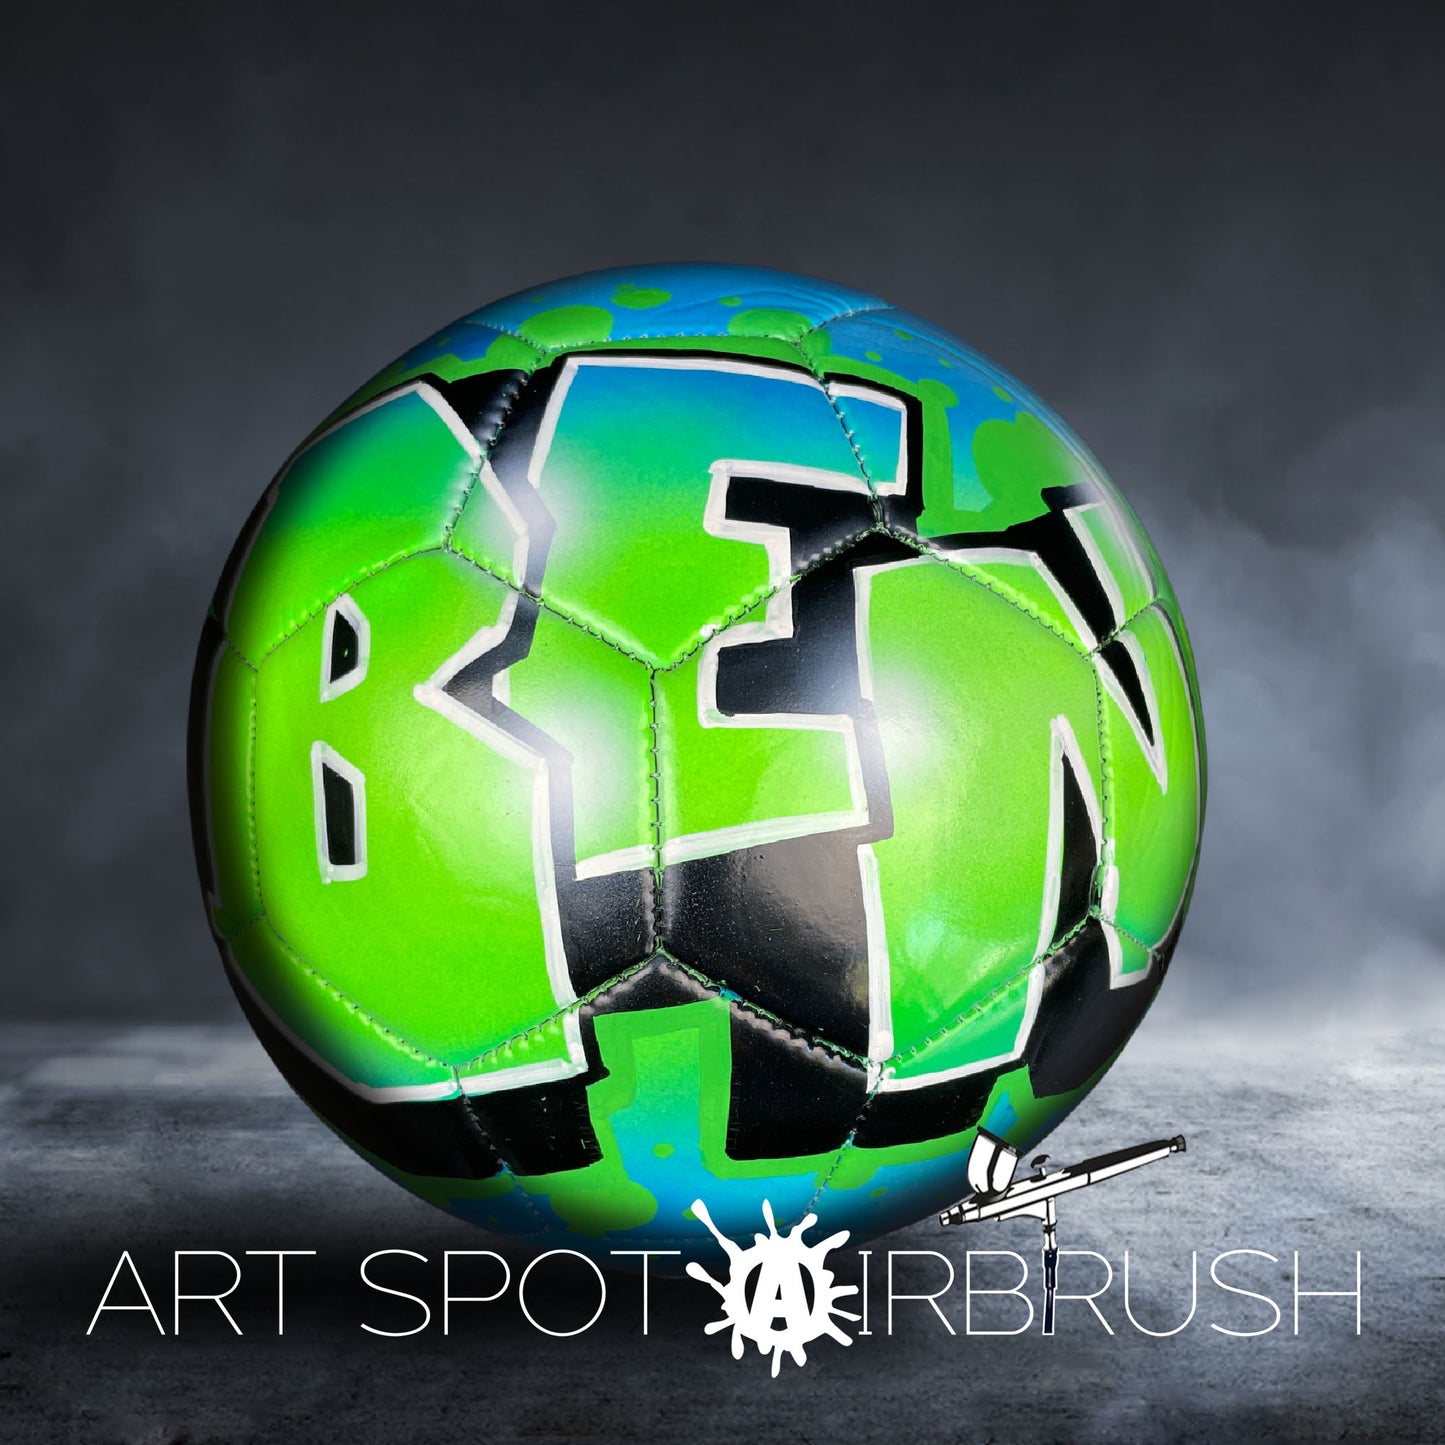 Personalized Soccer Ball with Name in Graffiti